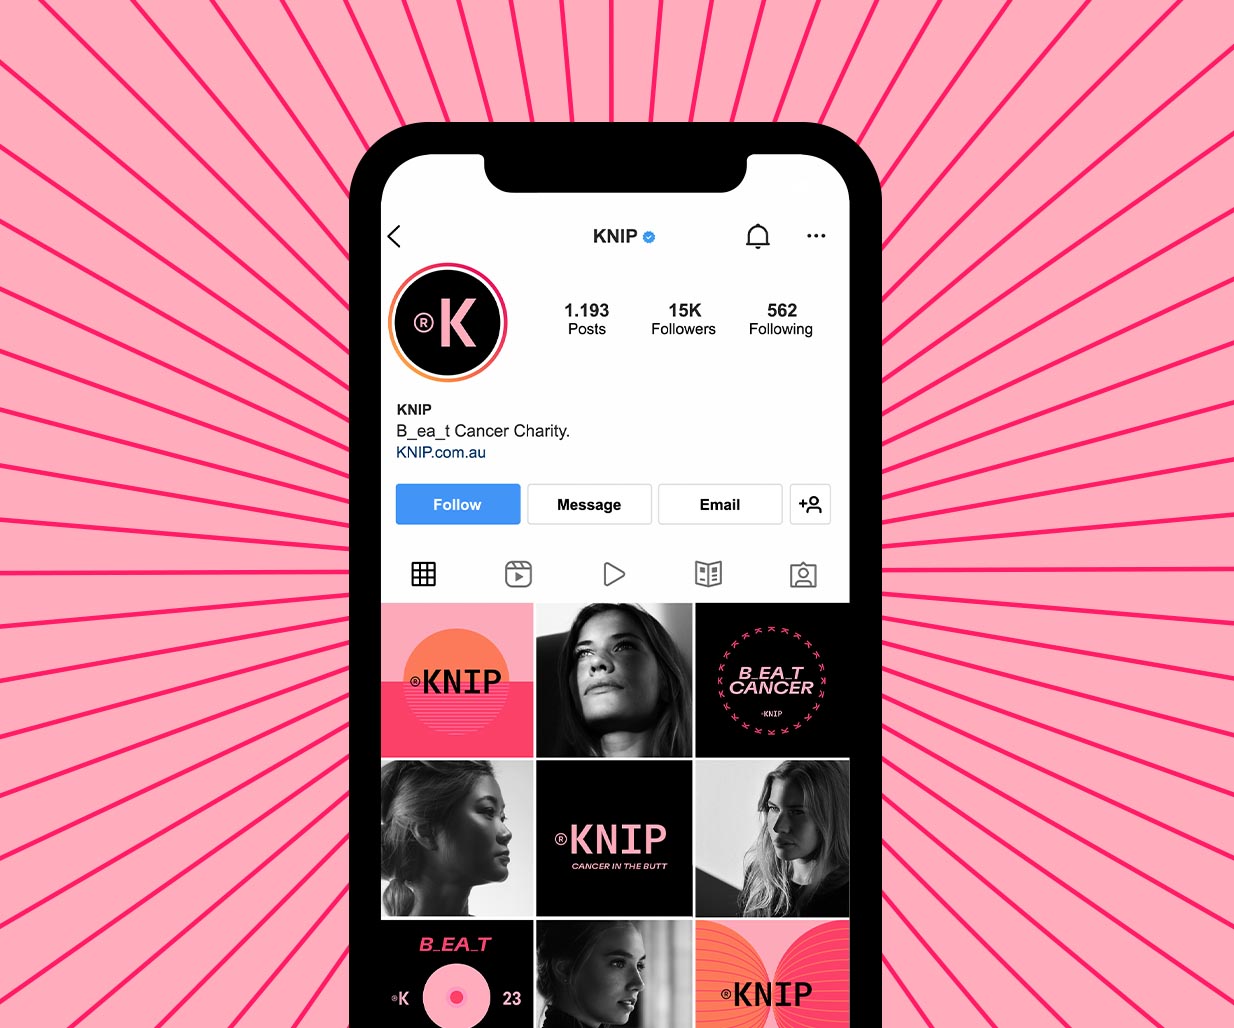 Branding agency, Percept, flips 'pink' to create KNIP in a branding and communication design project to help raise funds for charity to beat breast cancer, Image G